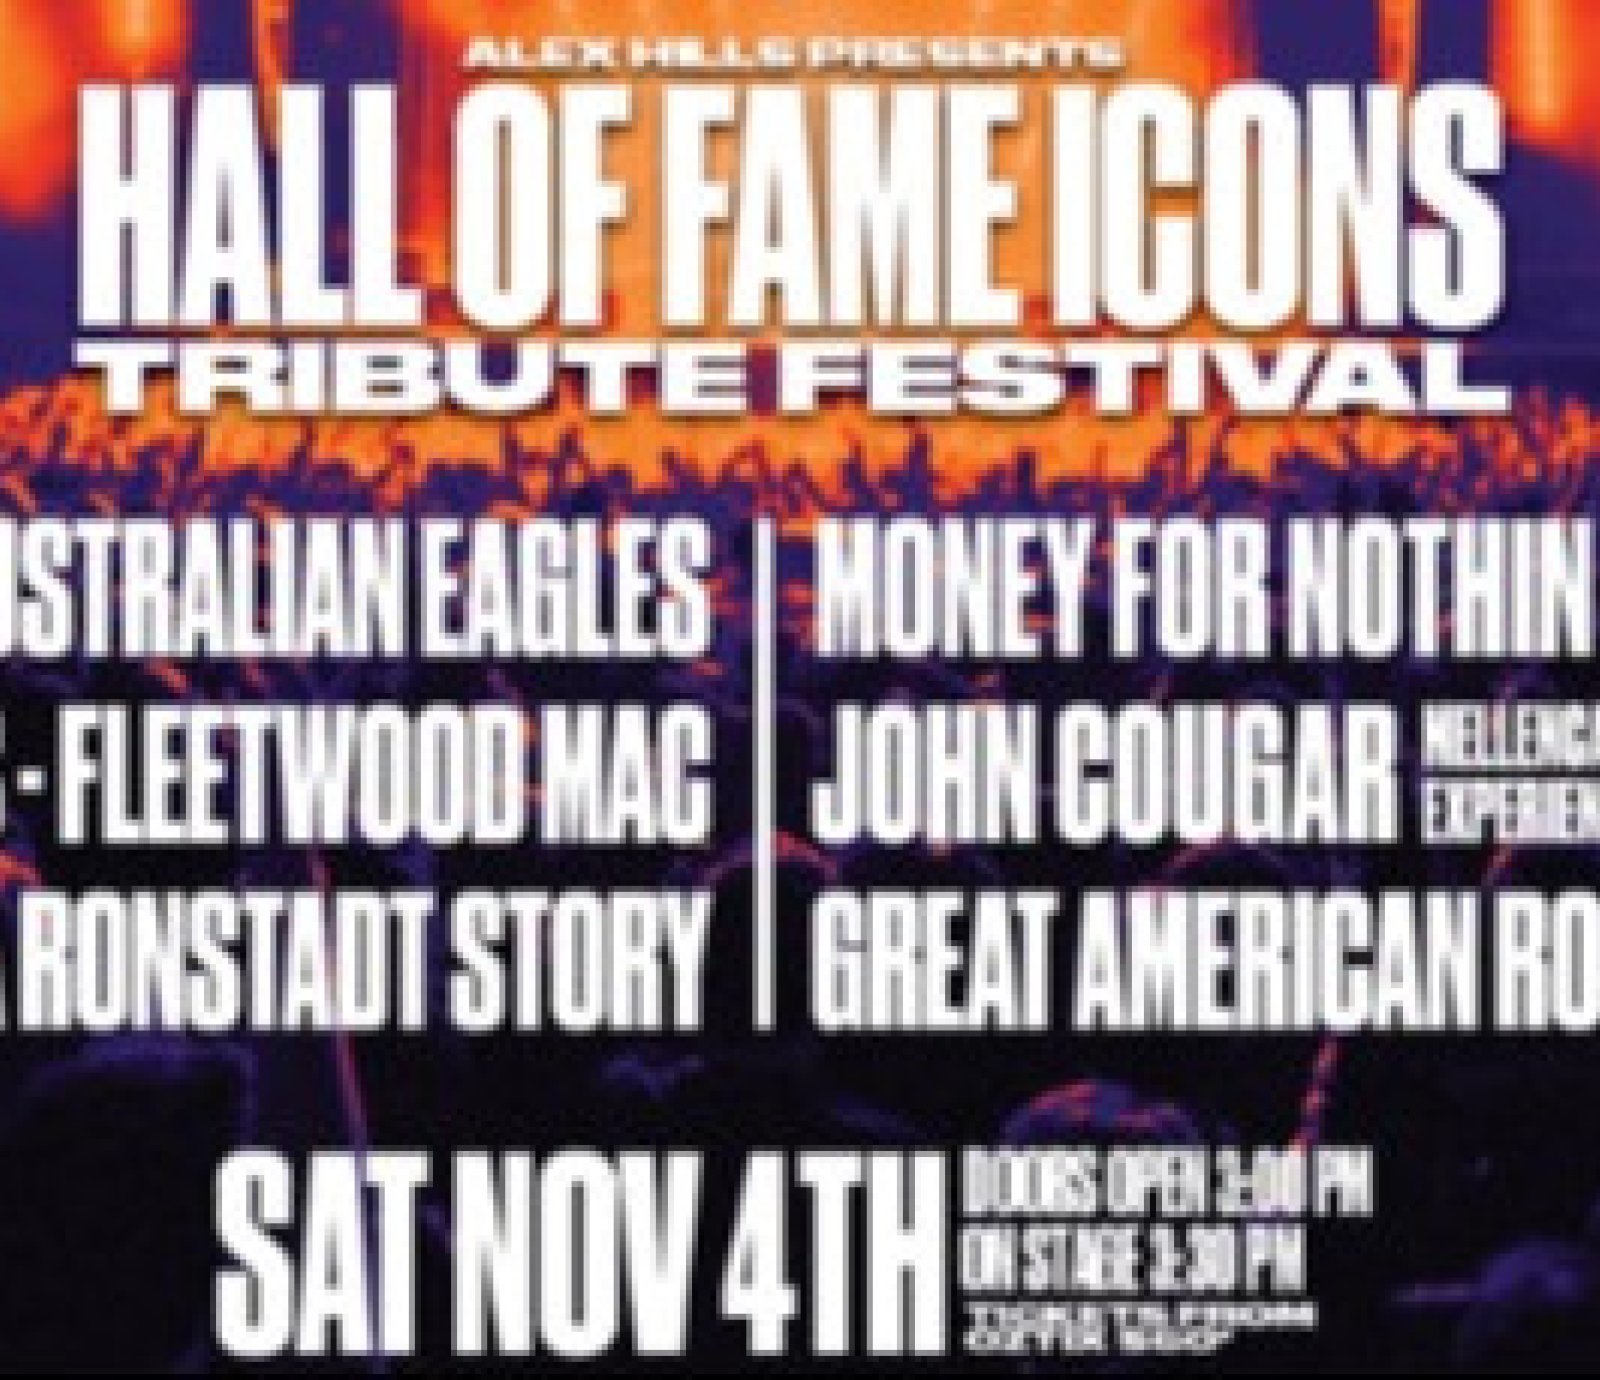 Hall Of Fame Icons Tribute Festival